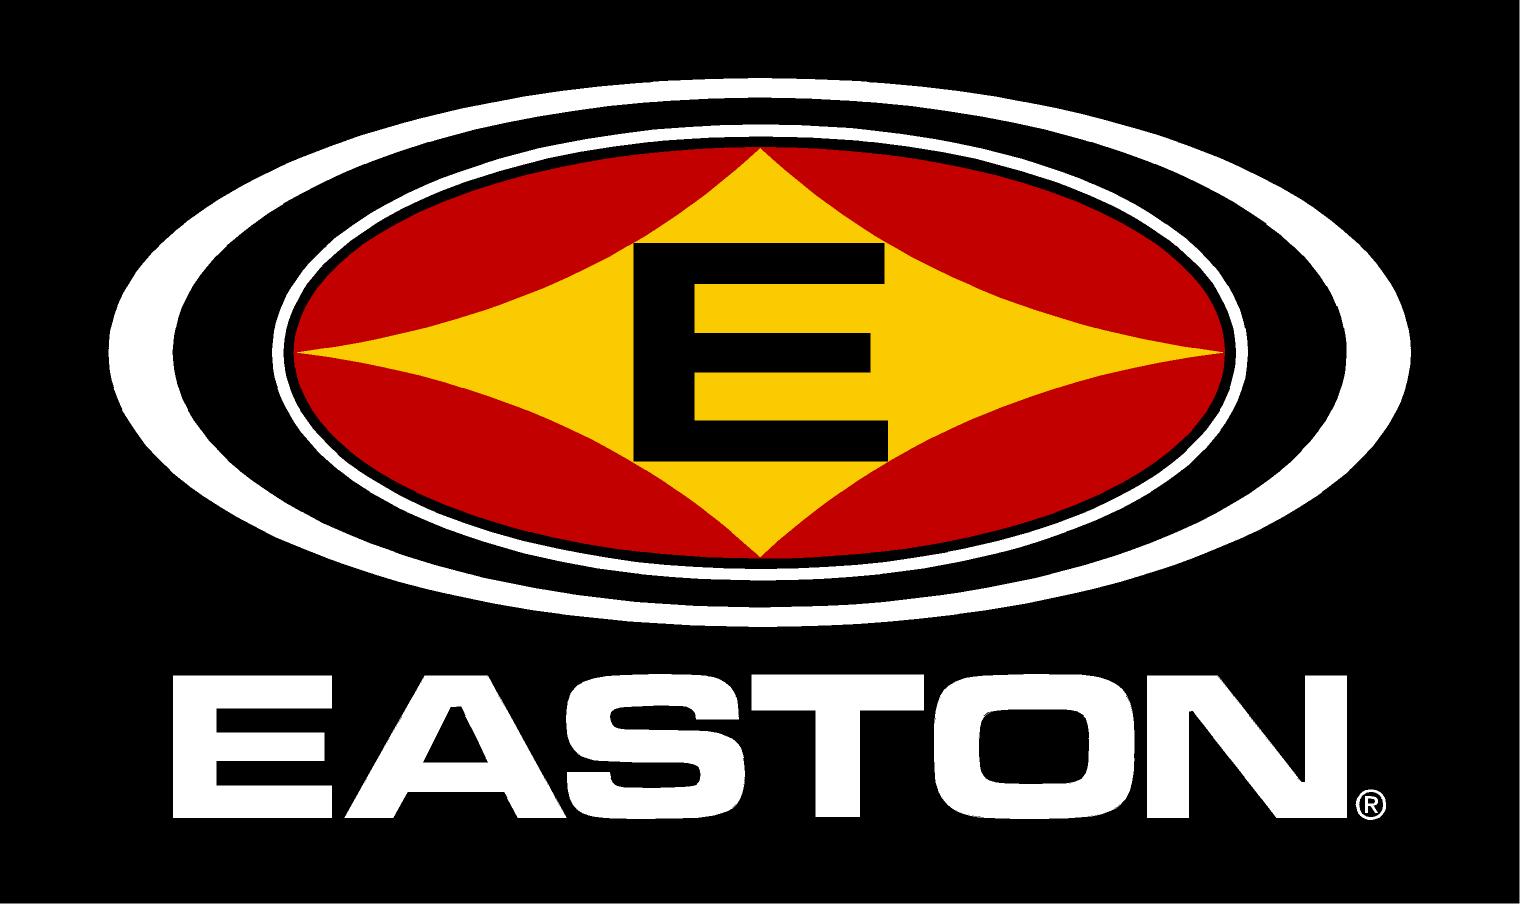 Easton has become a site for brands to develop, branch out